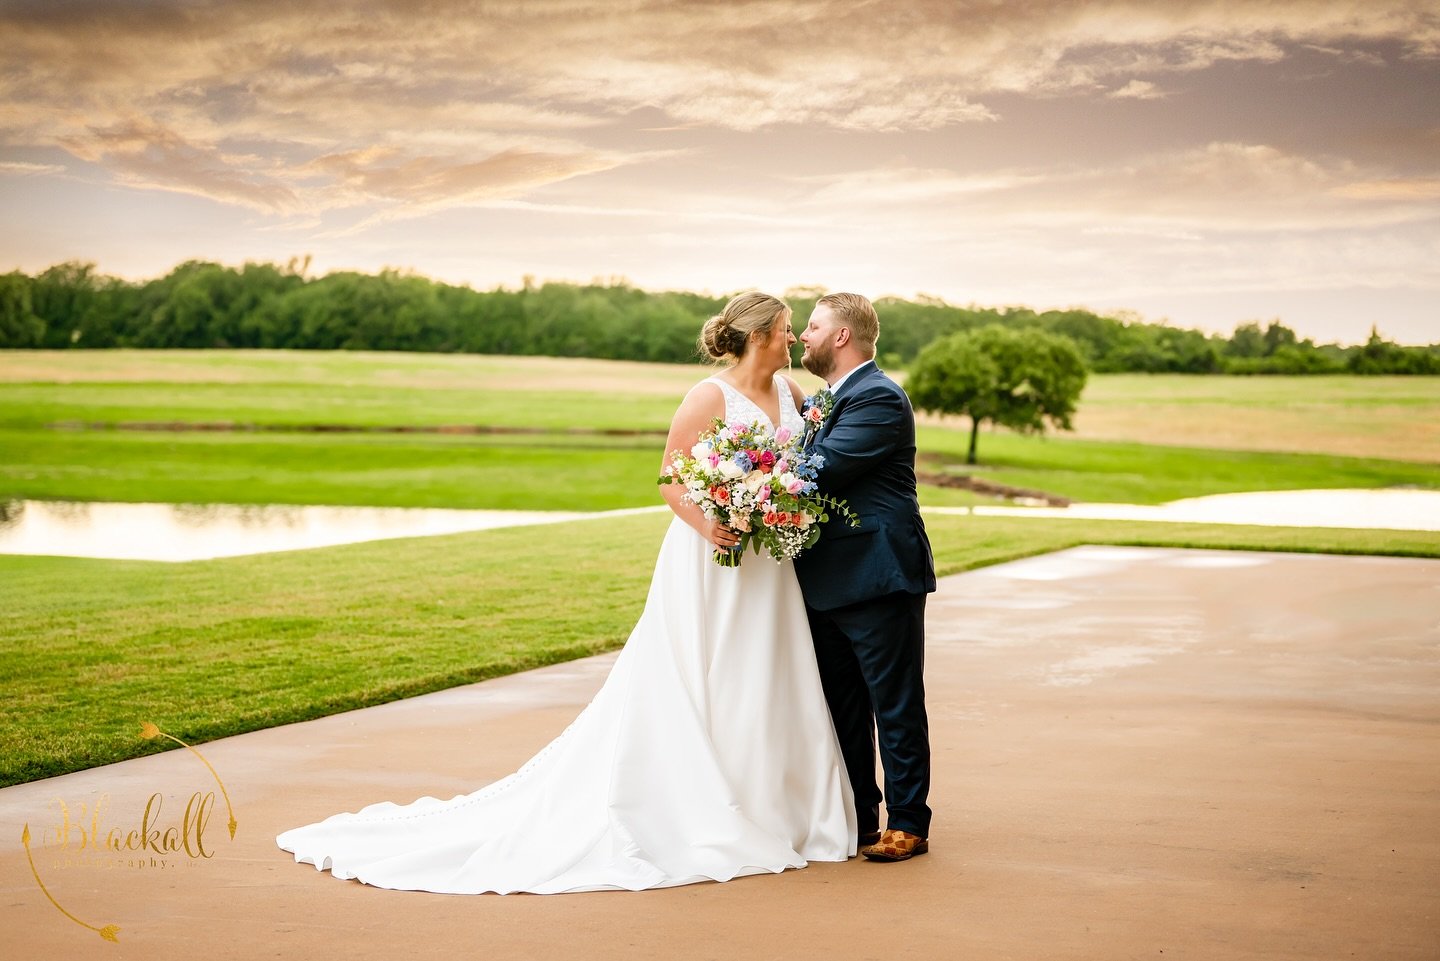 The rain stopped and the sun peeked out just in time for Rae and Dewaine to exchange their vows in a stunning outdoor ceremony at Bella Cavalli Events. The night was enchantingly magical, as if nature itself had conspired to create the perfect moment